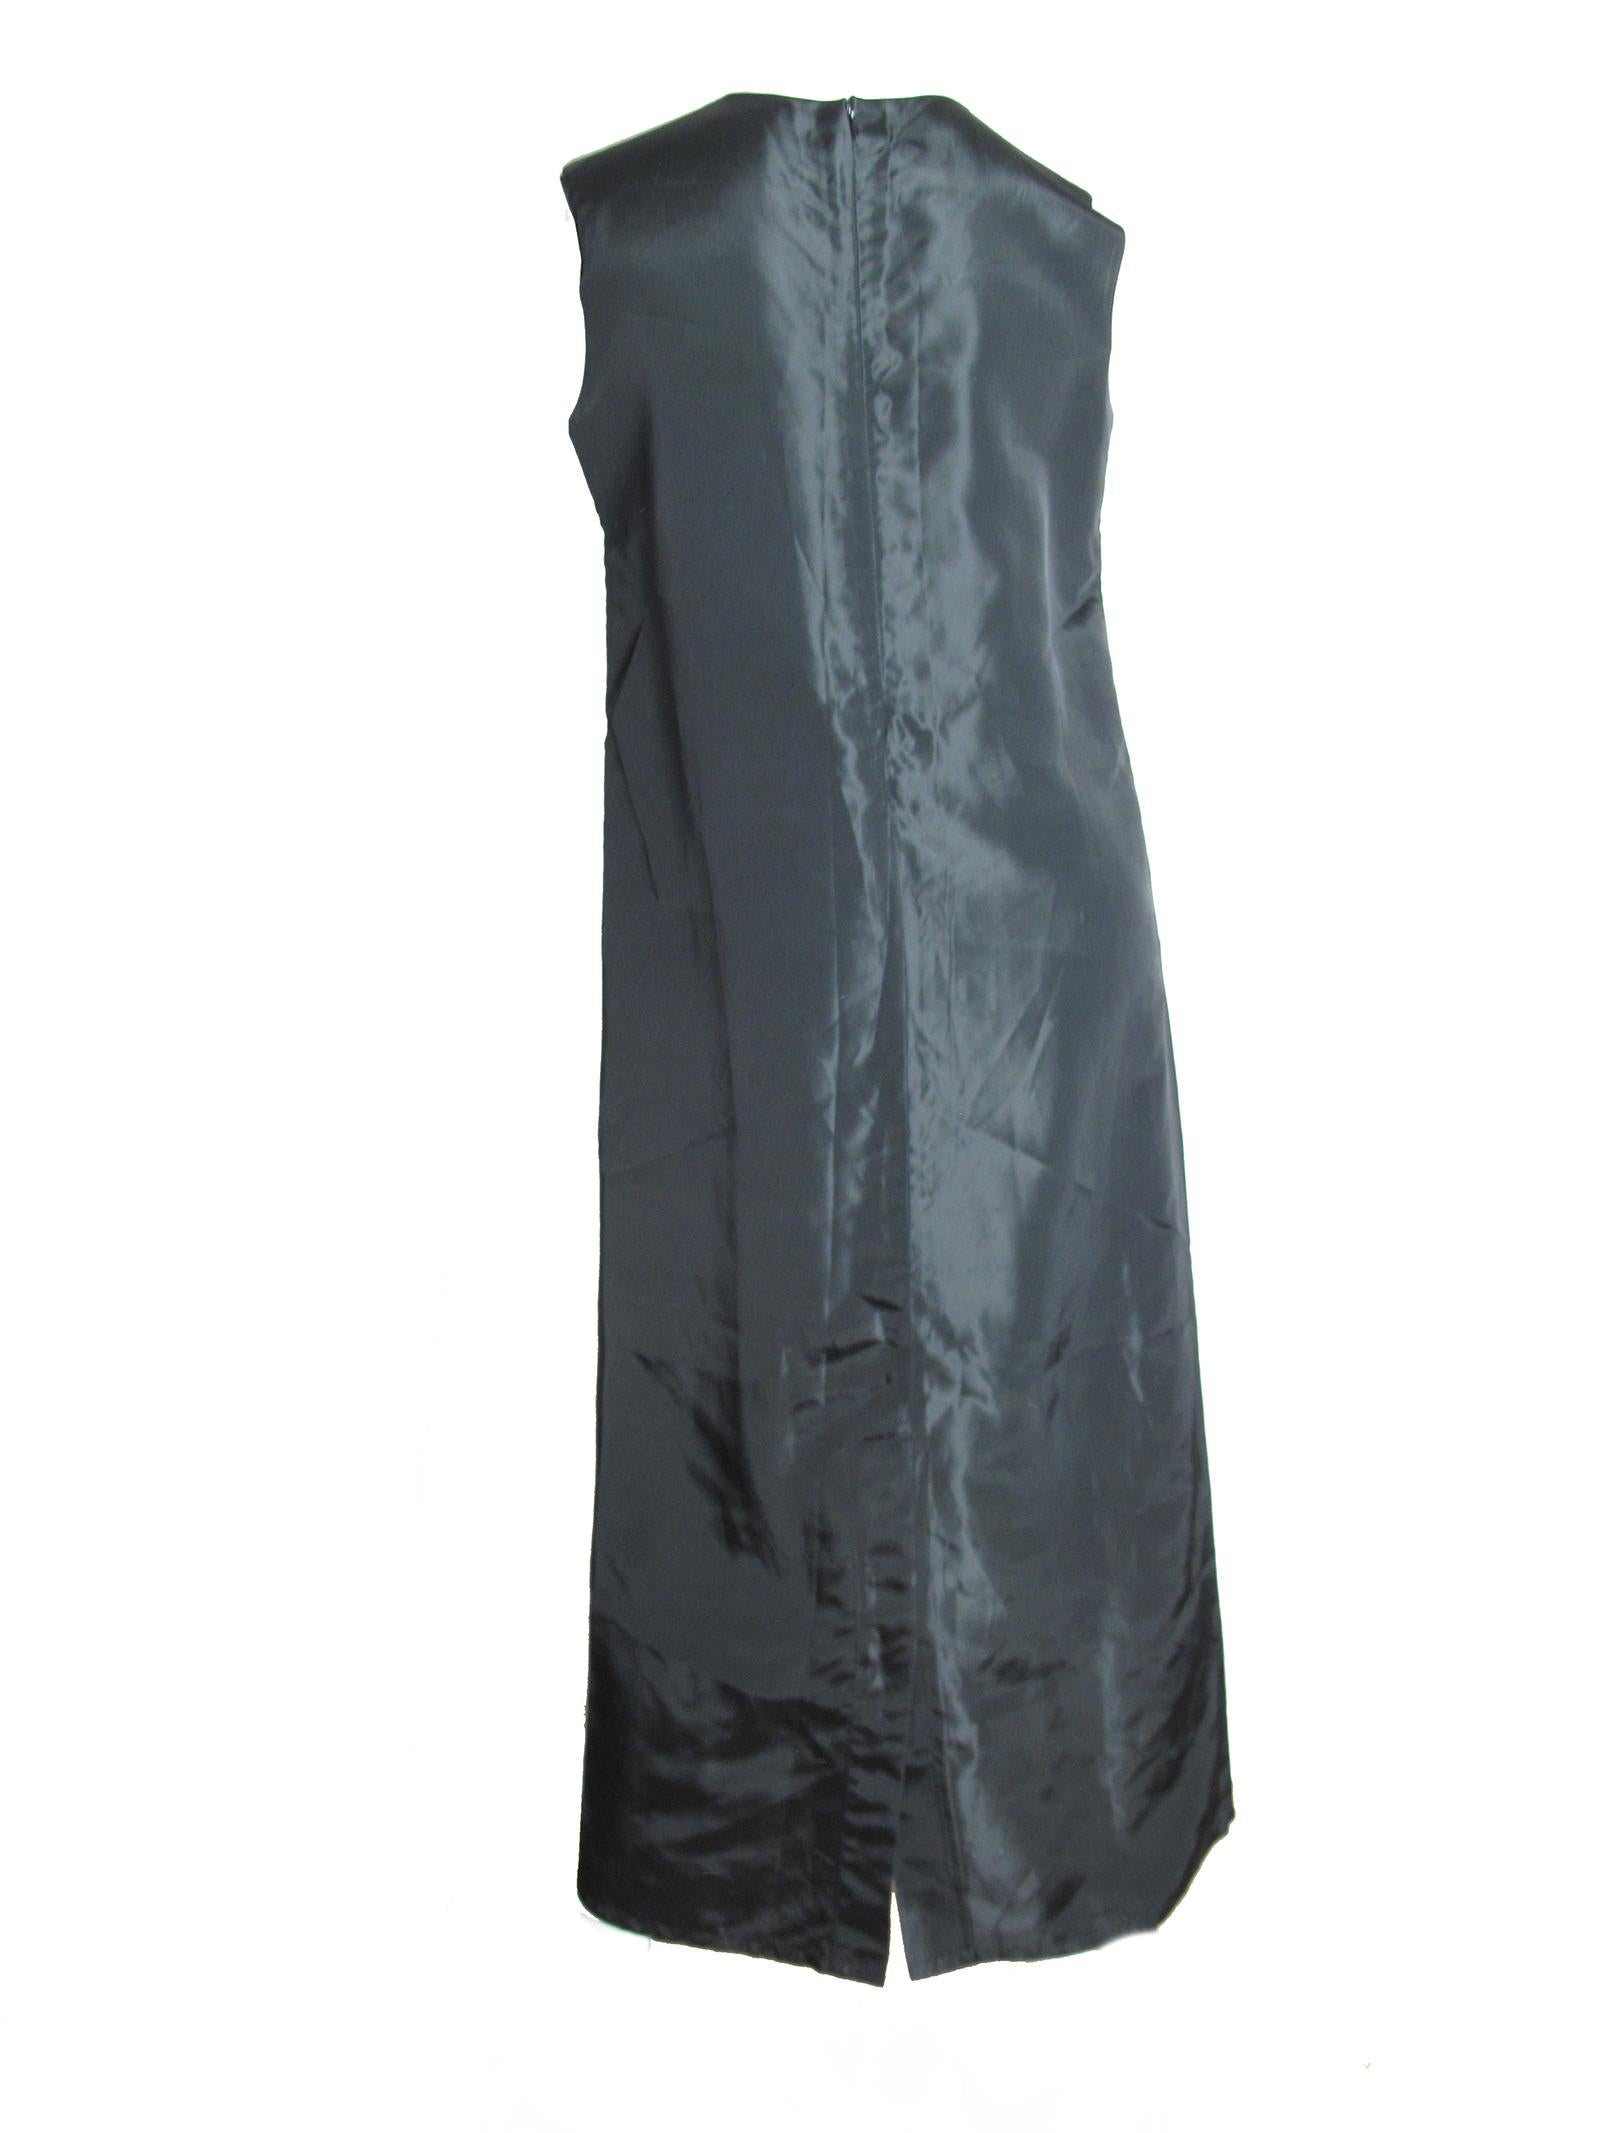 Yohji Yamamoto + Noir black acetate sleeveless dress circa 1990s.  Yohji Size 4 / US size 8 / 10 ( mannequin is a US size 6 ) 
We accept returns for refund, please see our terms.  We offer free ground shipping within the US.  Please let us know if